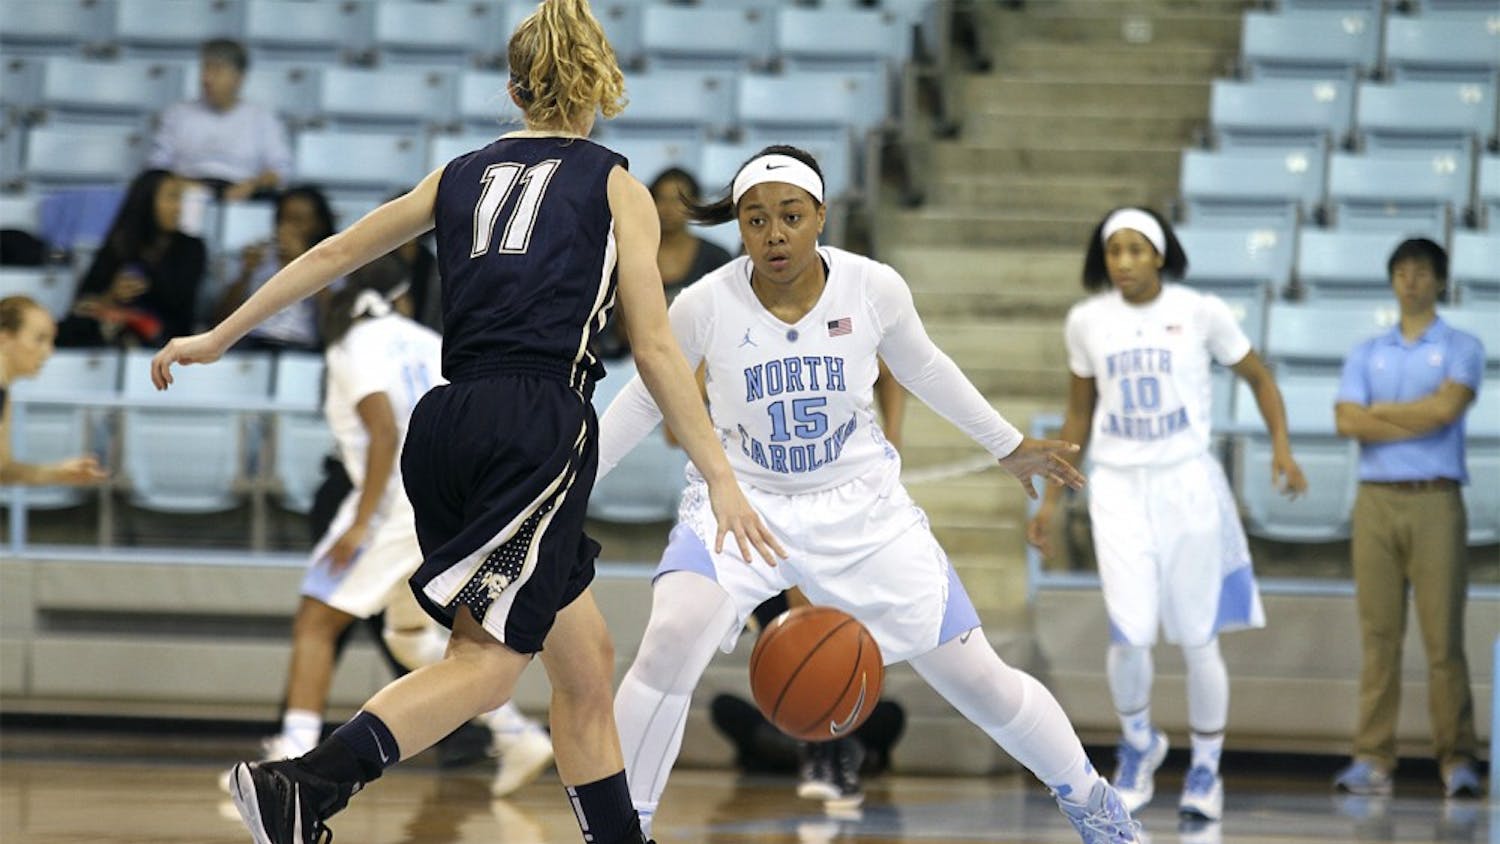 The UNC women's basketball team beat Wingate University 92-50 on Monday night. Sophomore Allisha Gray scored 14 points during the game.